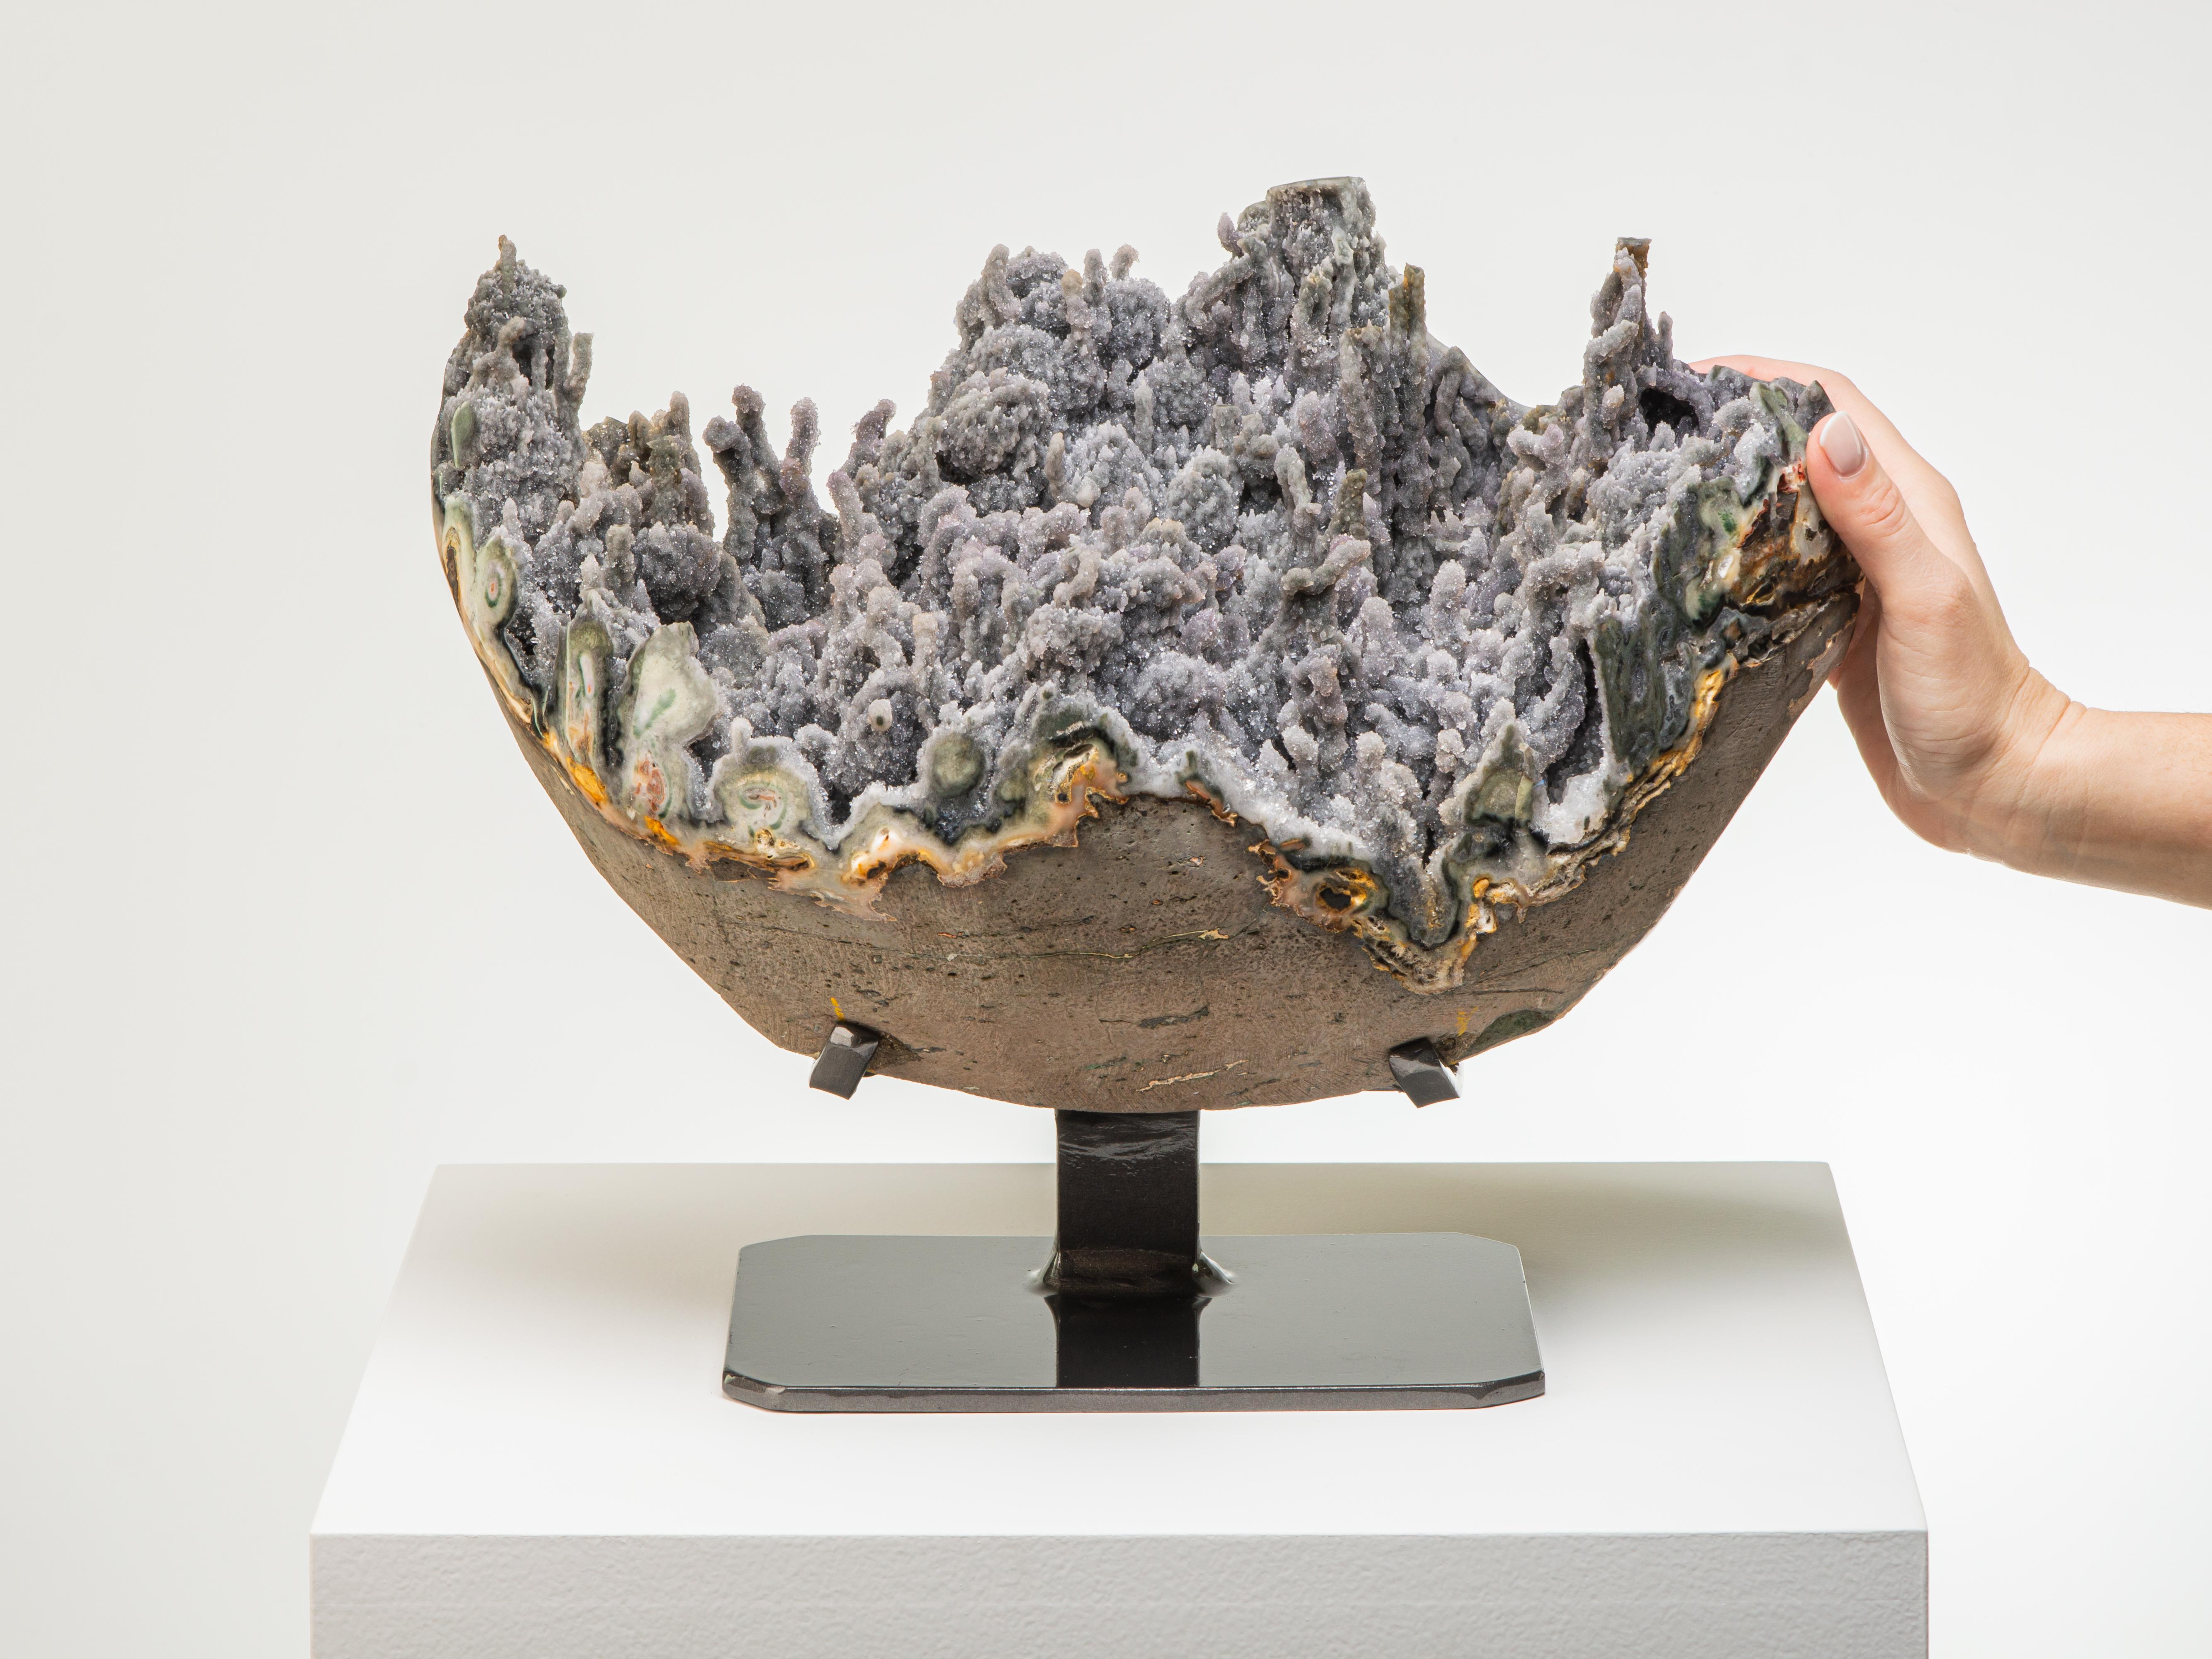 Beautiful green-grey coral-like stalactites emerge from the interior lining of this
round geode. The borders polished to reveal the celdonite shell with the exterior
basalt still visible.

This piece was legally and ethically sourced directly in